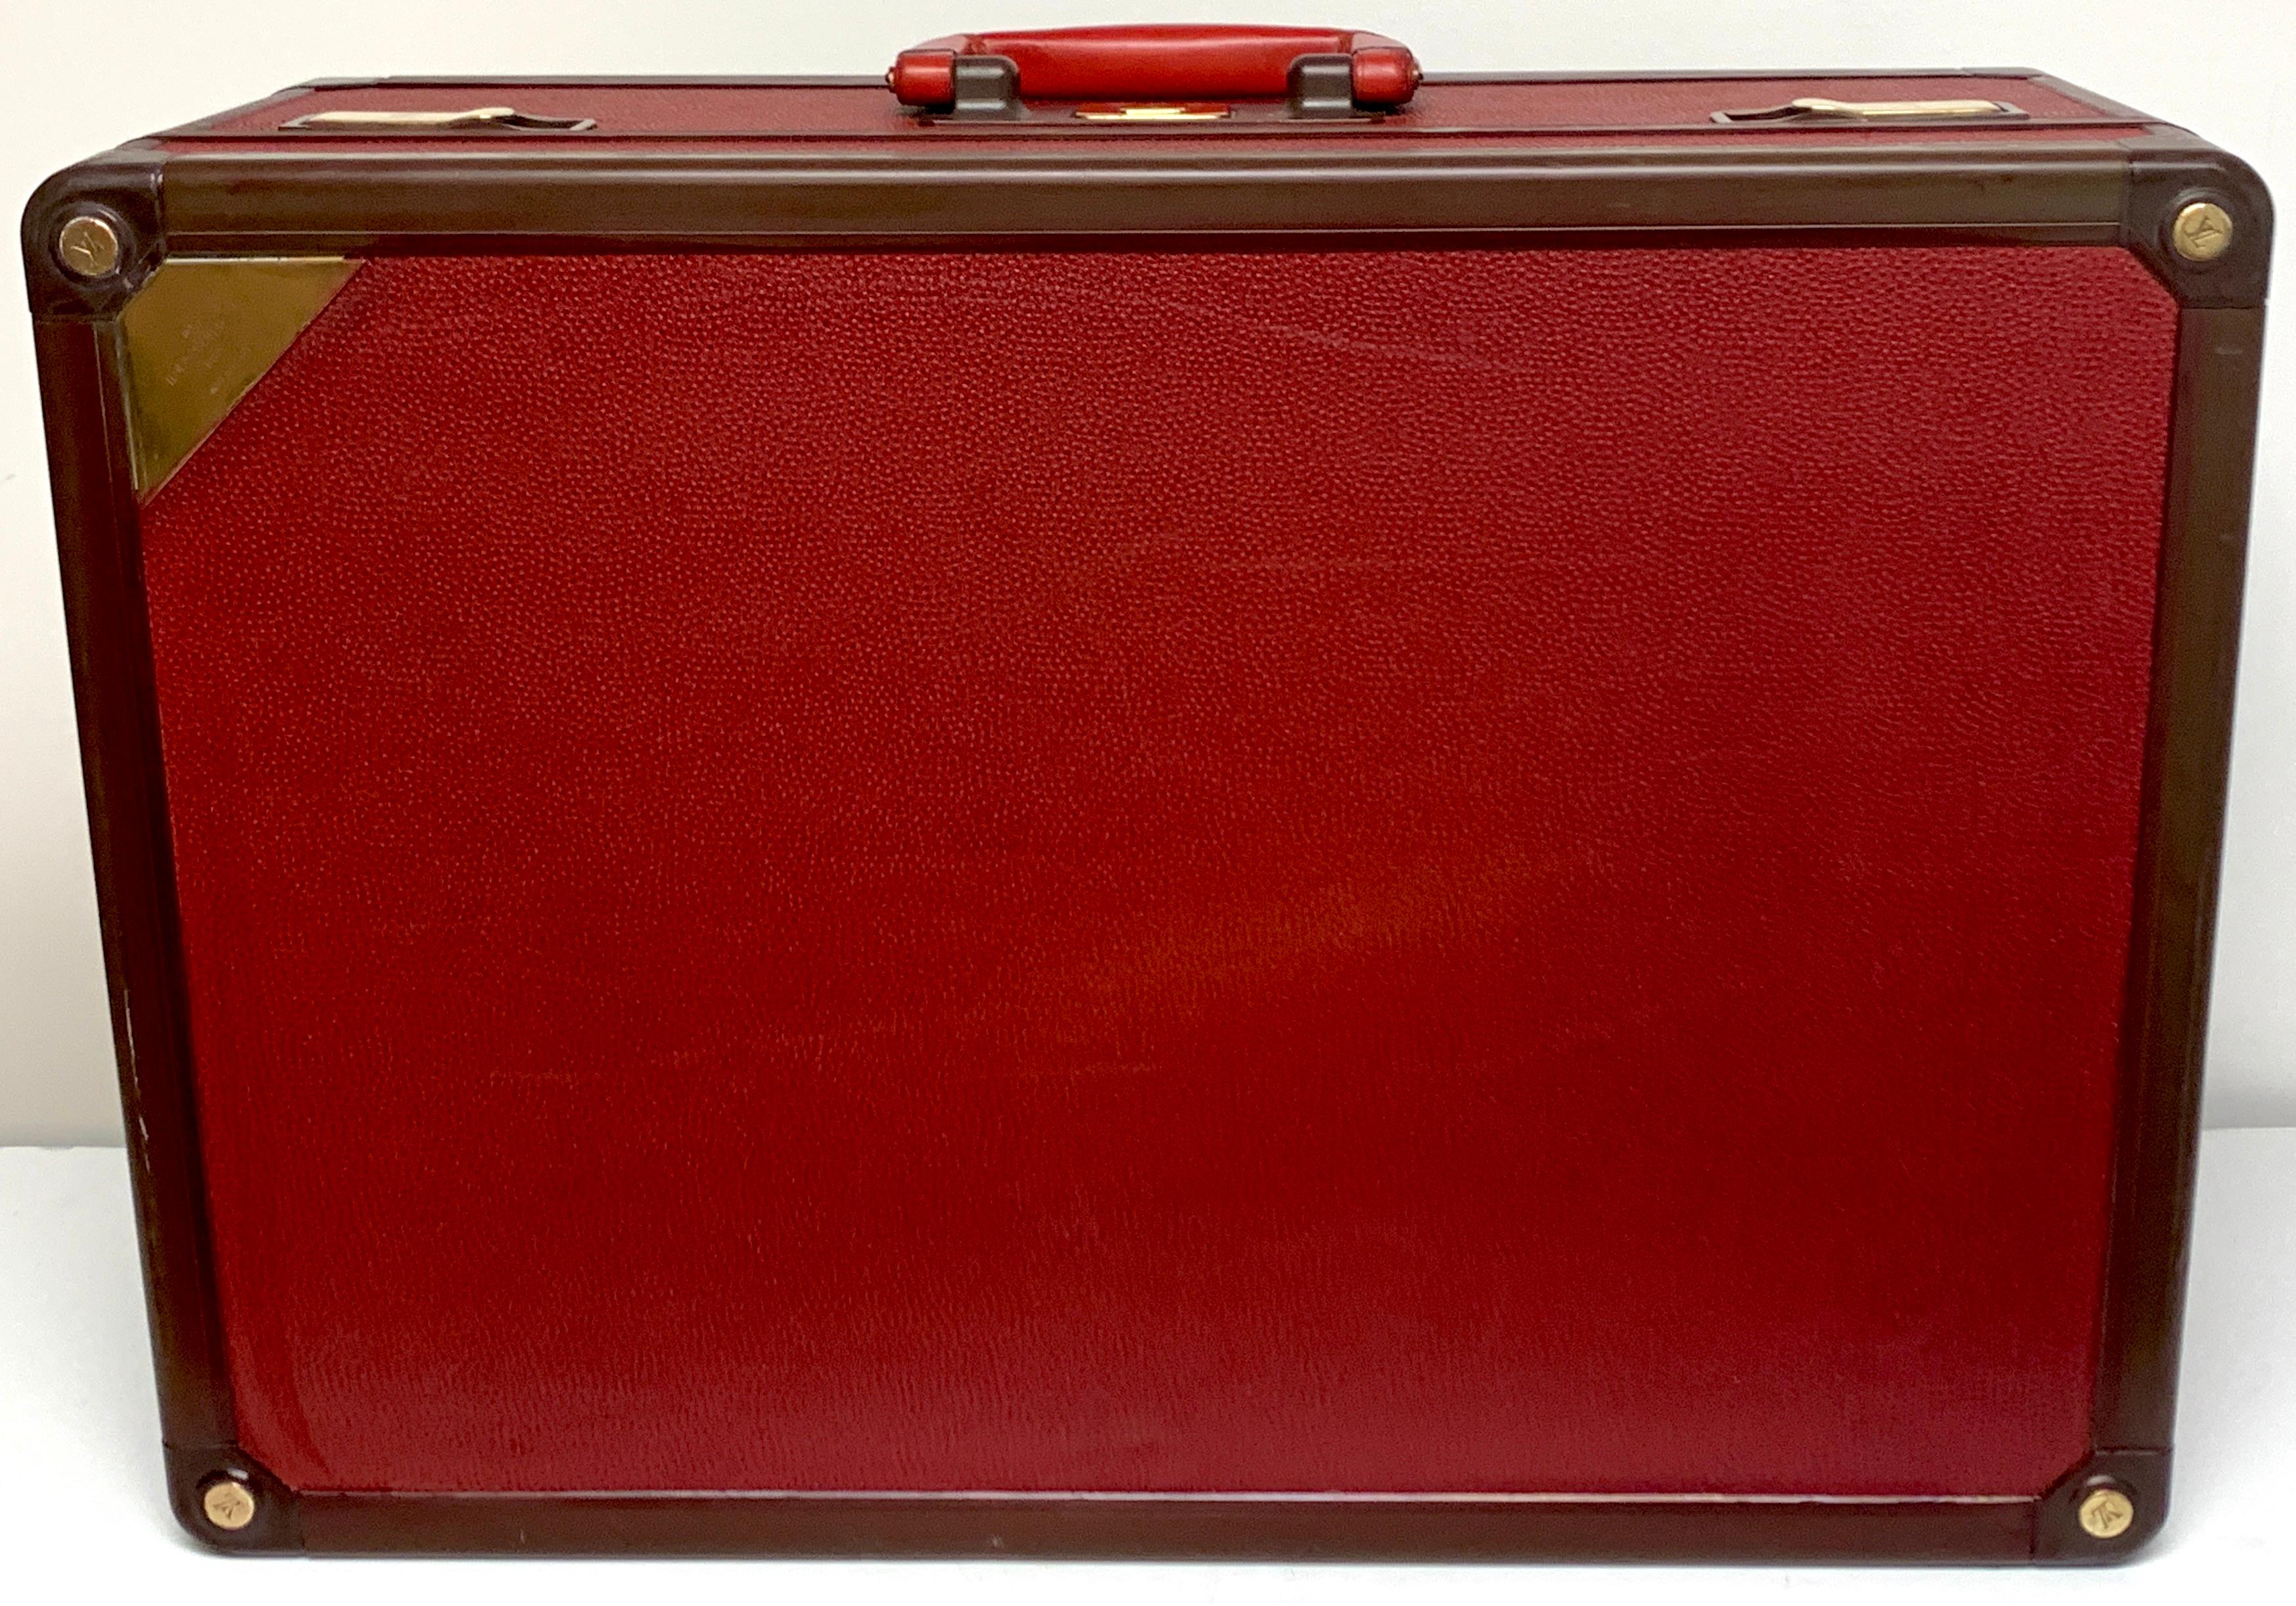 Louis Vuitton red leather Le Challenge (Americas Cup) suitcase, 1987
Red textured Calfskin, rare only made for one year, Americas Cup Challenge Suit Case
Brass lock number 1021718
Interior serial number C00-1547
No Key.